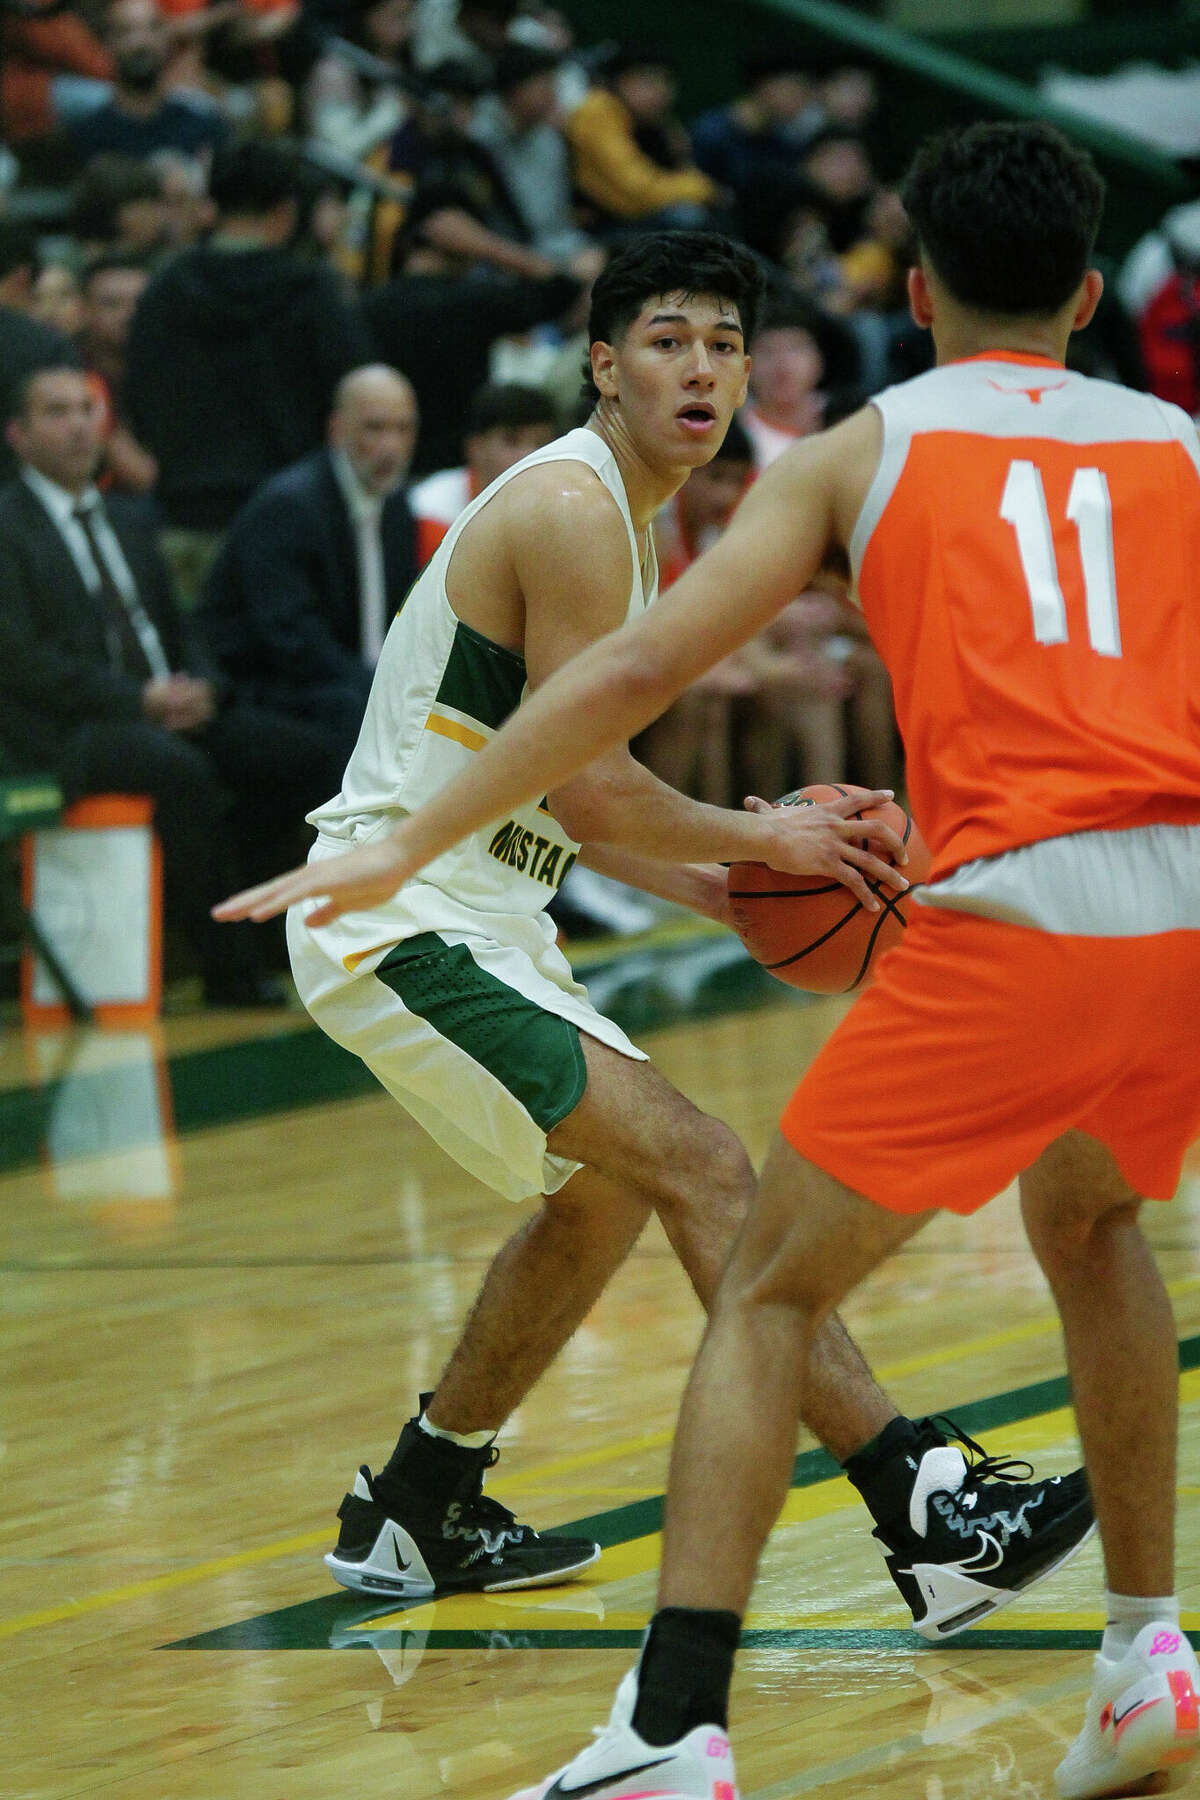 Ian Tovar scored 24 points as the Nixon Mustangs beat the United Longhorns Tuesday.